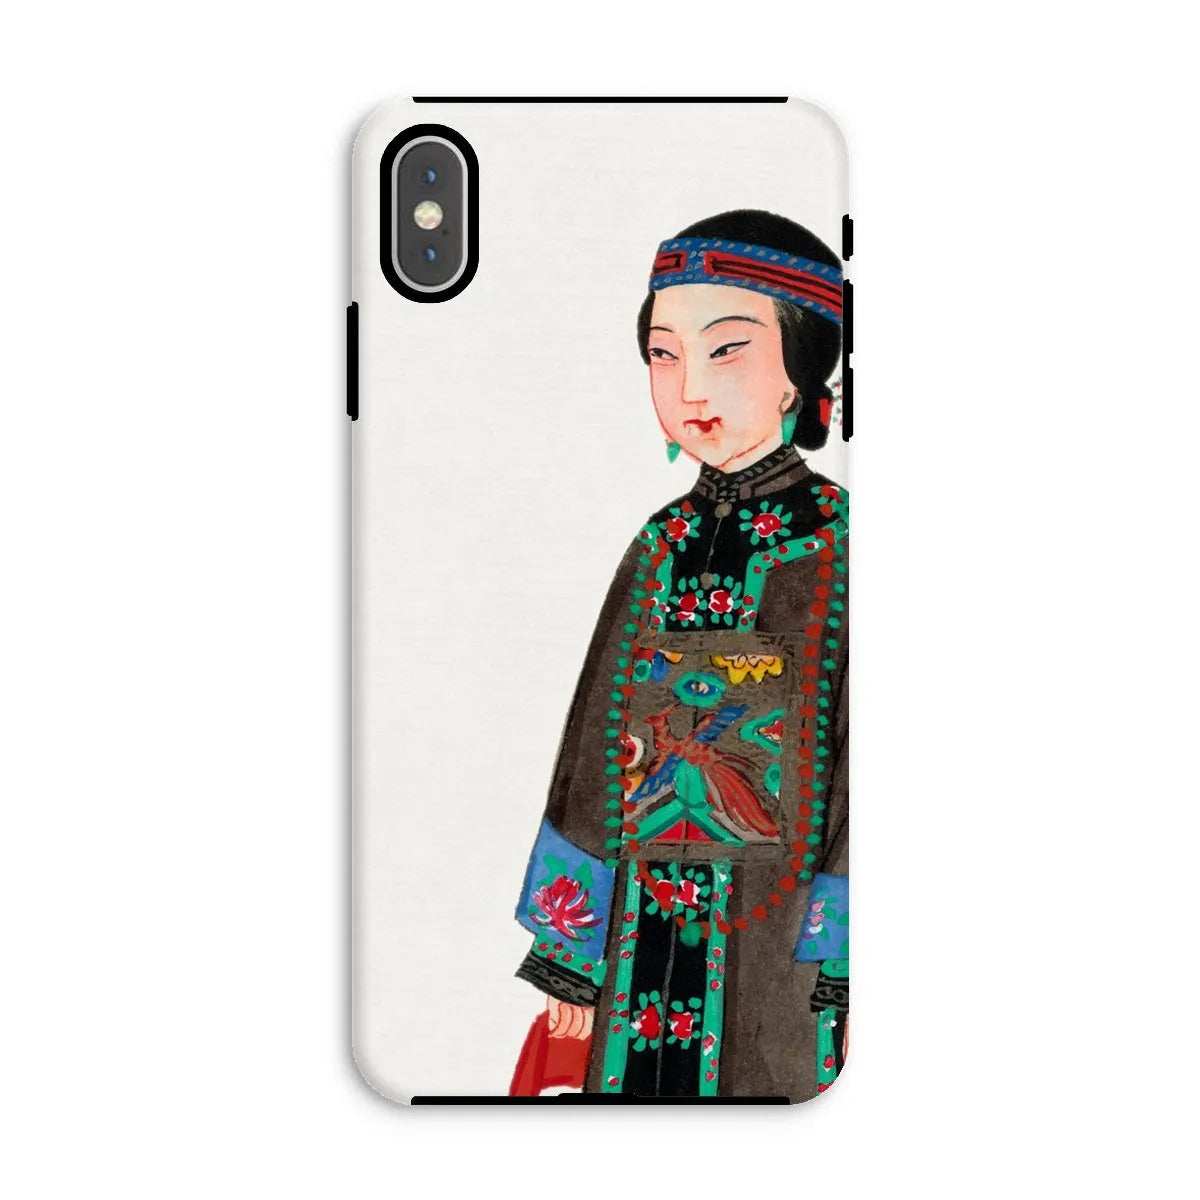 Noblewoman At Court - Chinese Aesthetic Art Phone Case - Iphone Xs Max / Matte - Mobile Phone Cases - Aesthetic Art